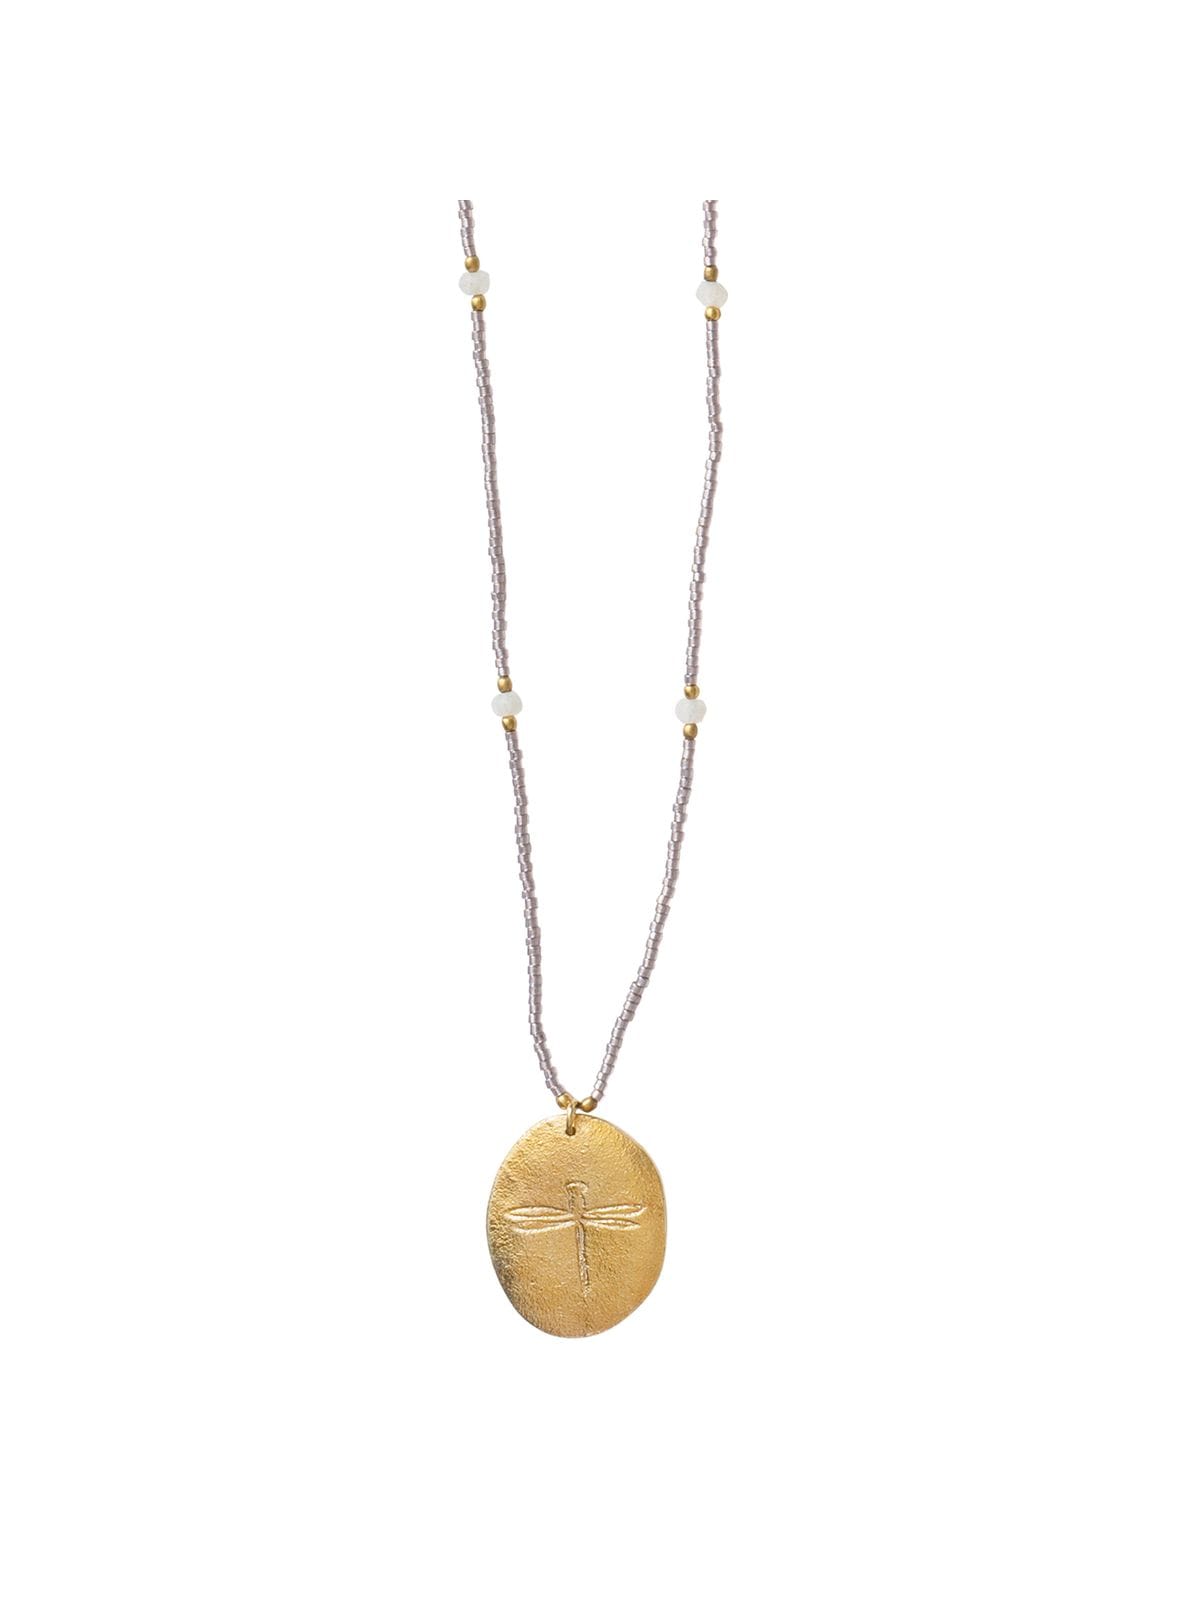 BL25416 - Swing Moonstone Gold Necklace_1200x1600